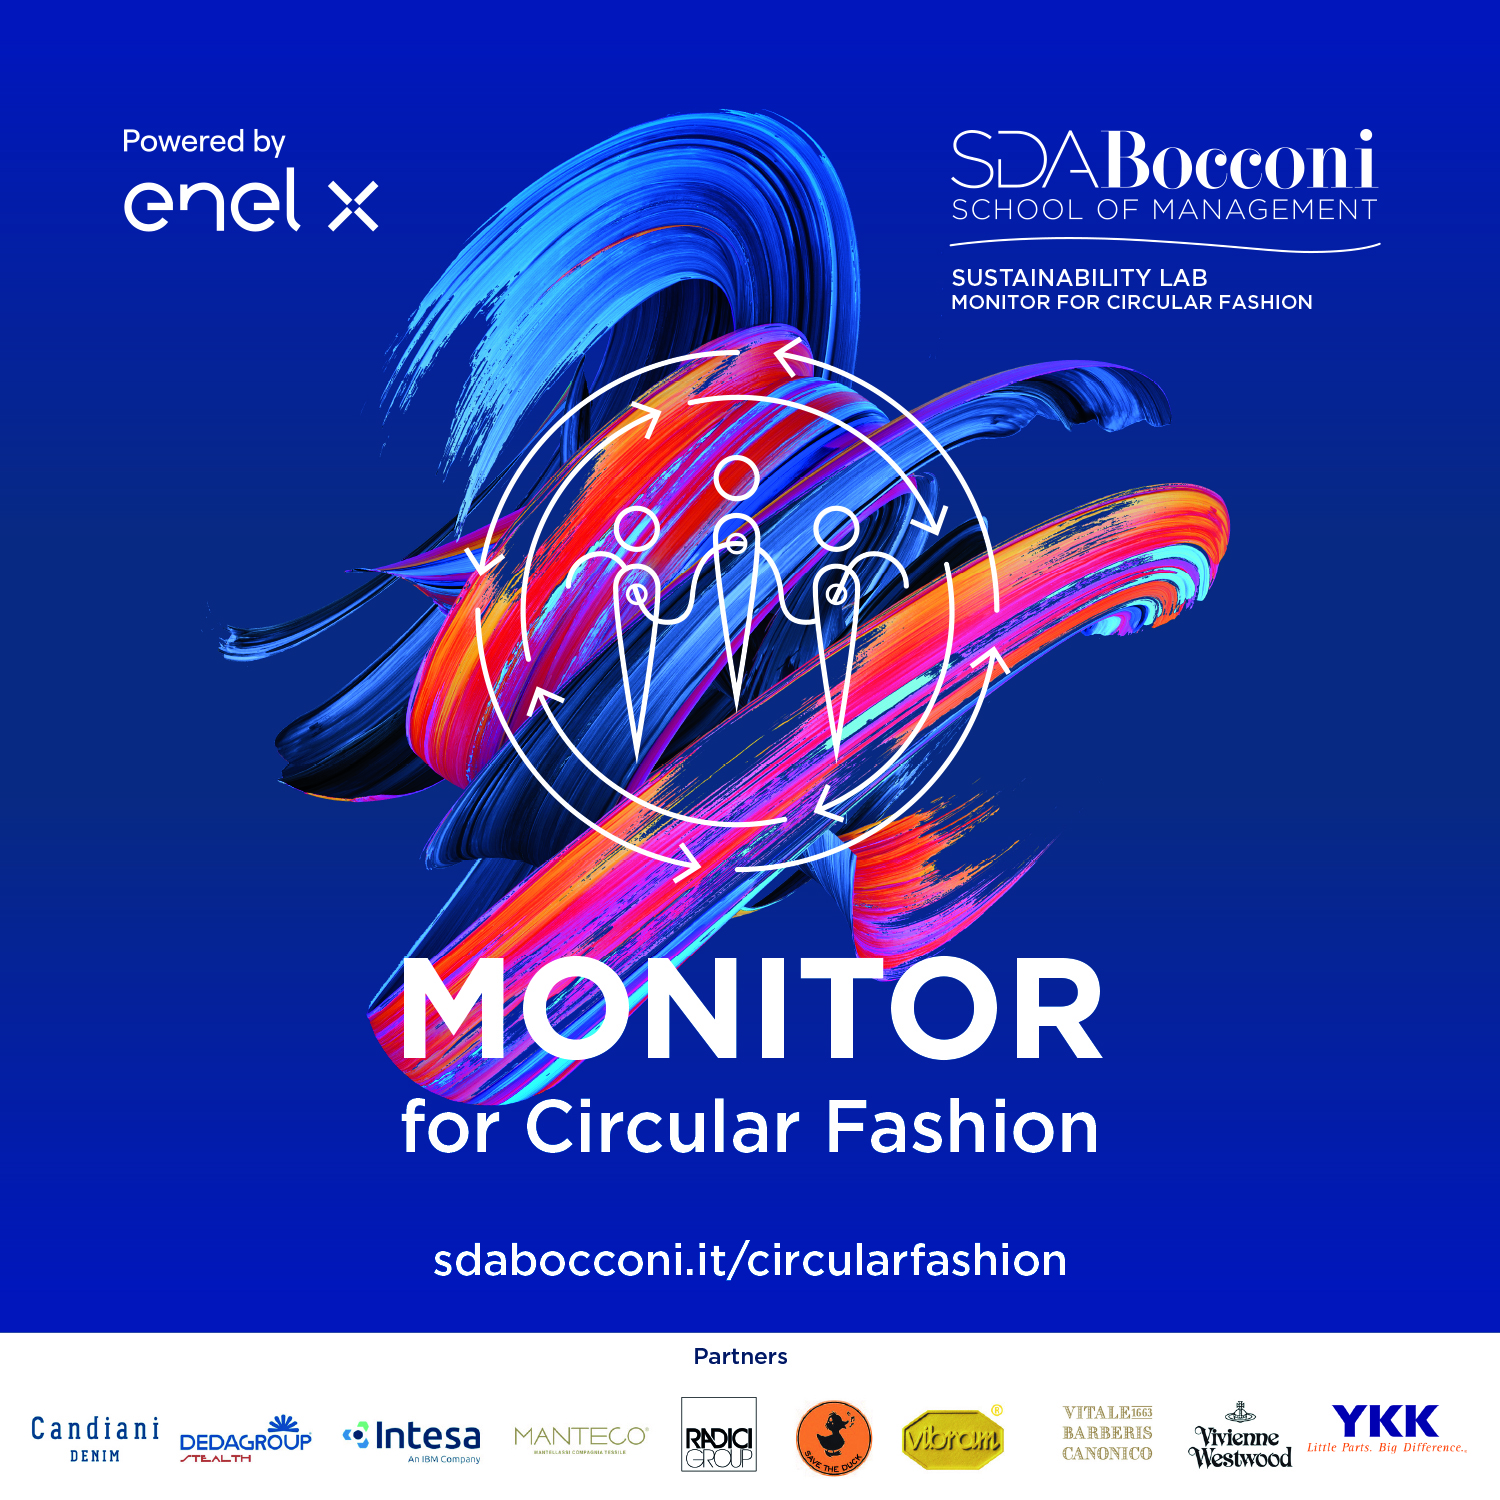 SDA Bocconi School of Management and Enel X partner to launch the Monitor for Circular Fashion